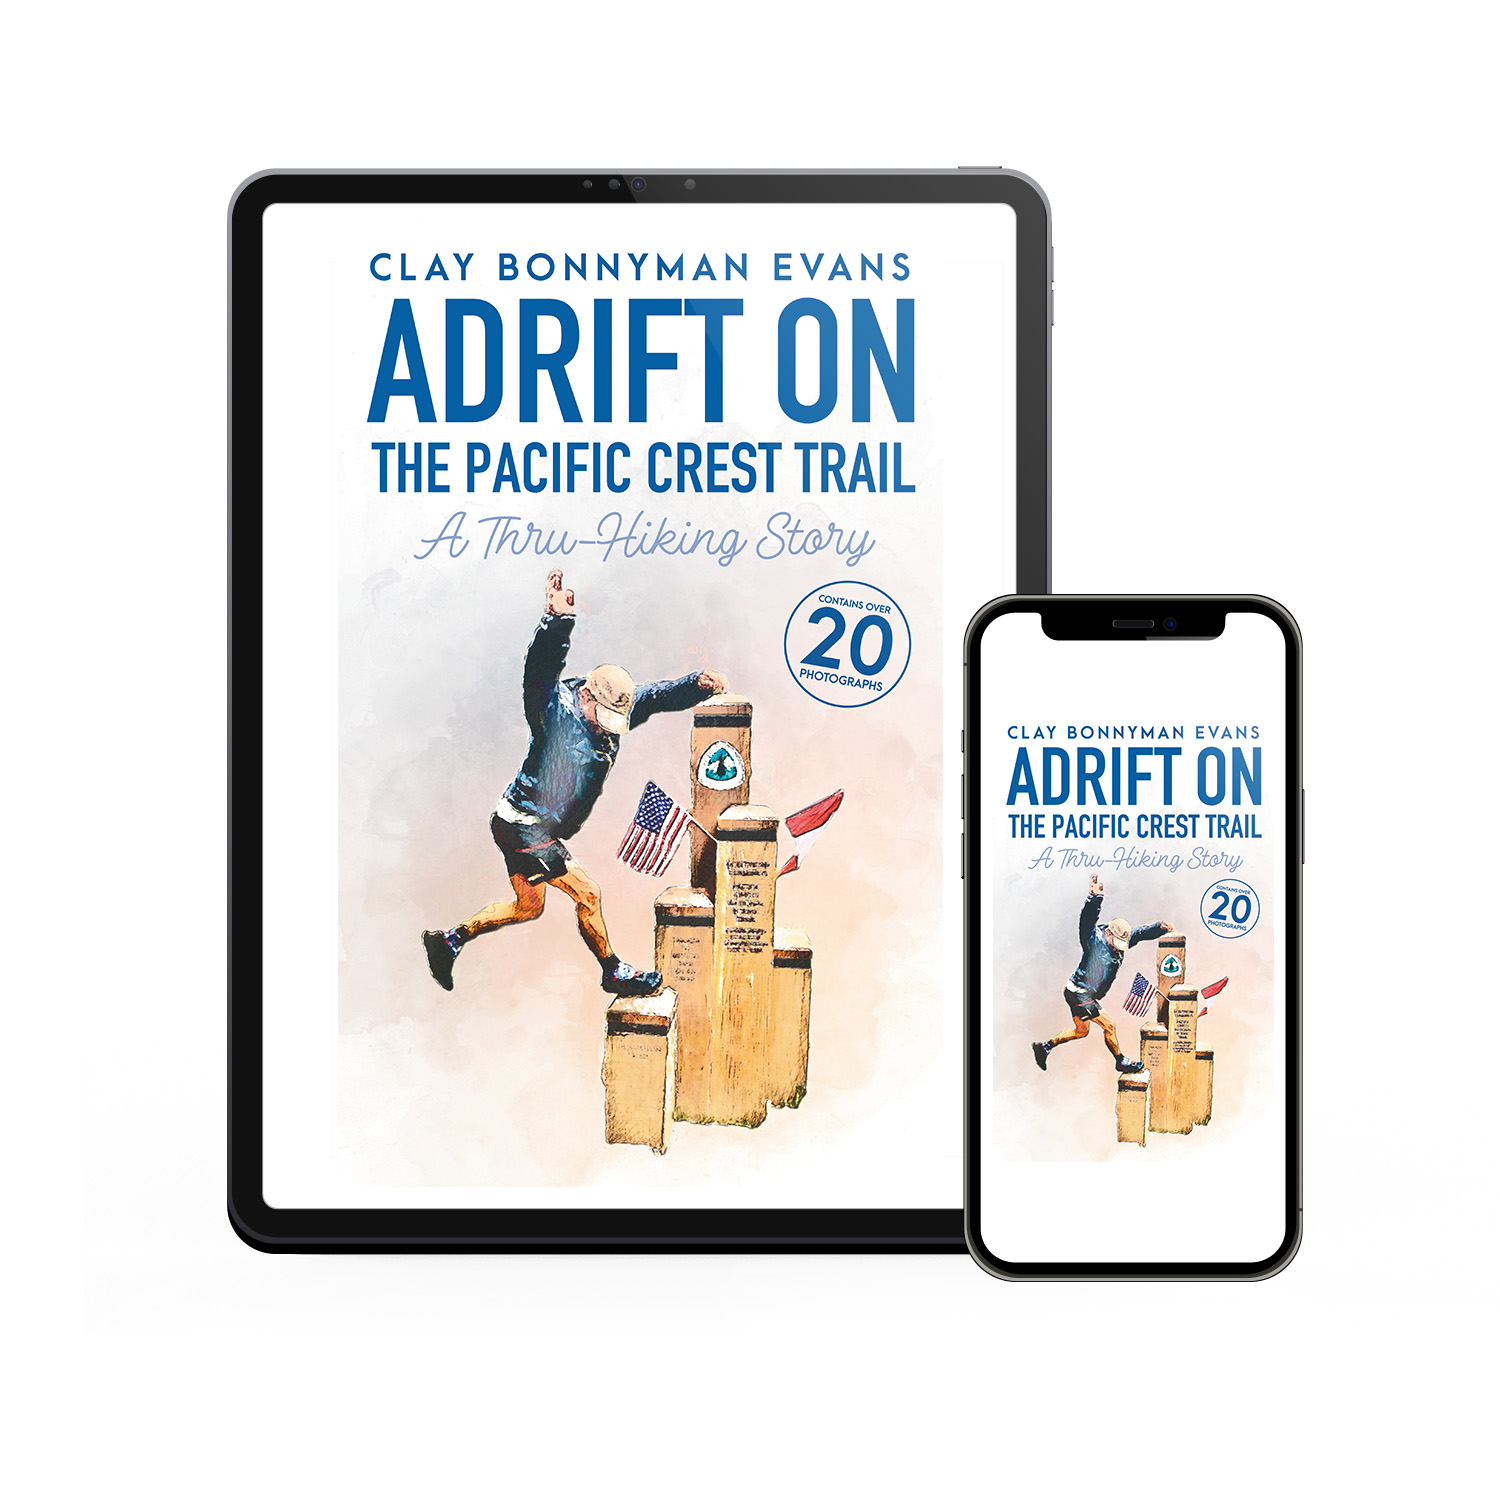 'Adrift On The Pacific Crest Trail' is a joyous, life-affirming thru-hiking memoir. The author is Clay Bonnyman Evans. The book cover design and interior formatting are by Mark Thomas. To learn more about what Mark could do for your book, please visit coverness.com.